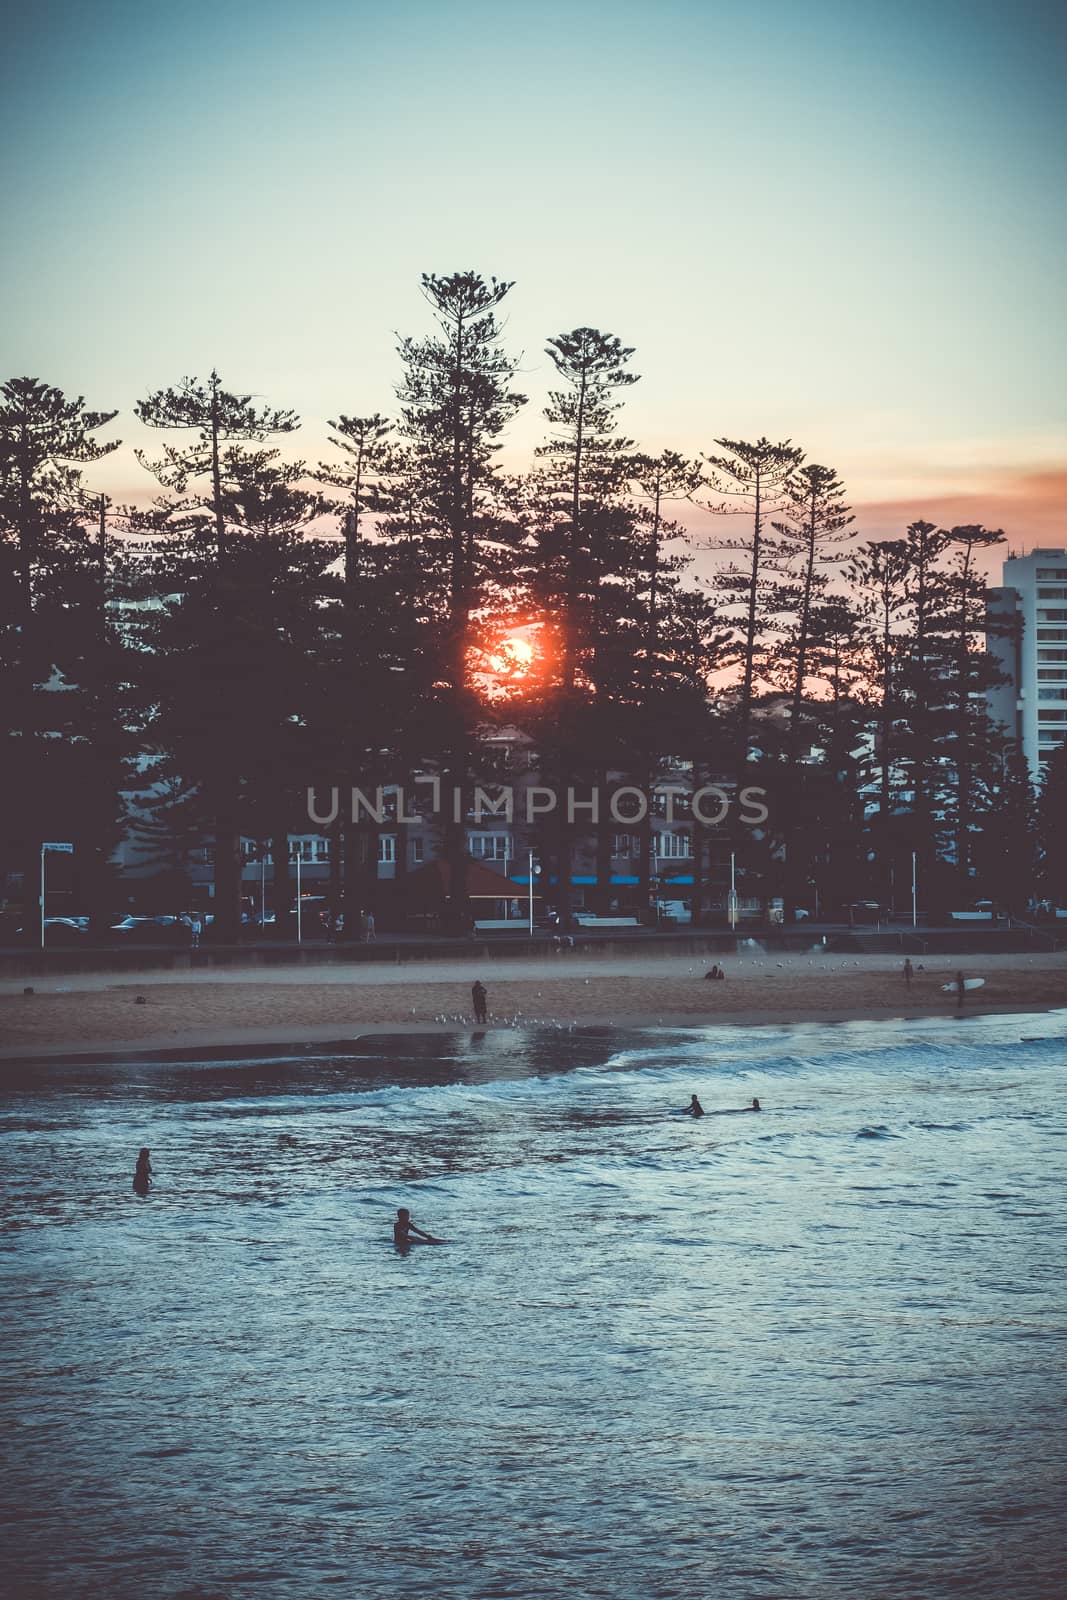 Manly Beach at sunset, Sydney, New South Wales, Australia